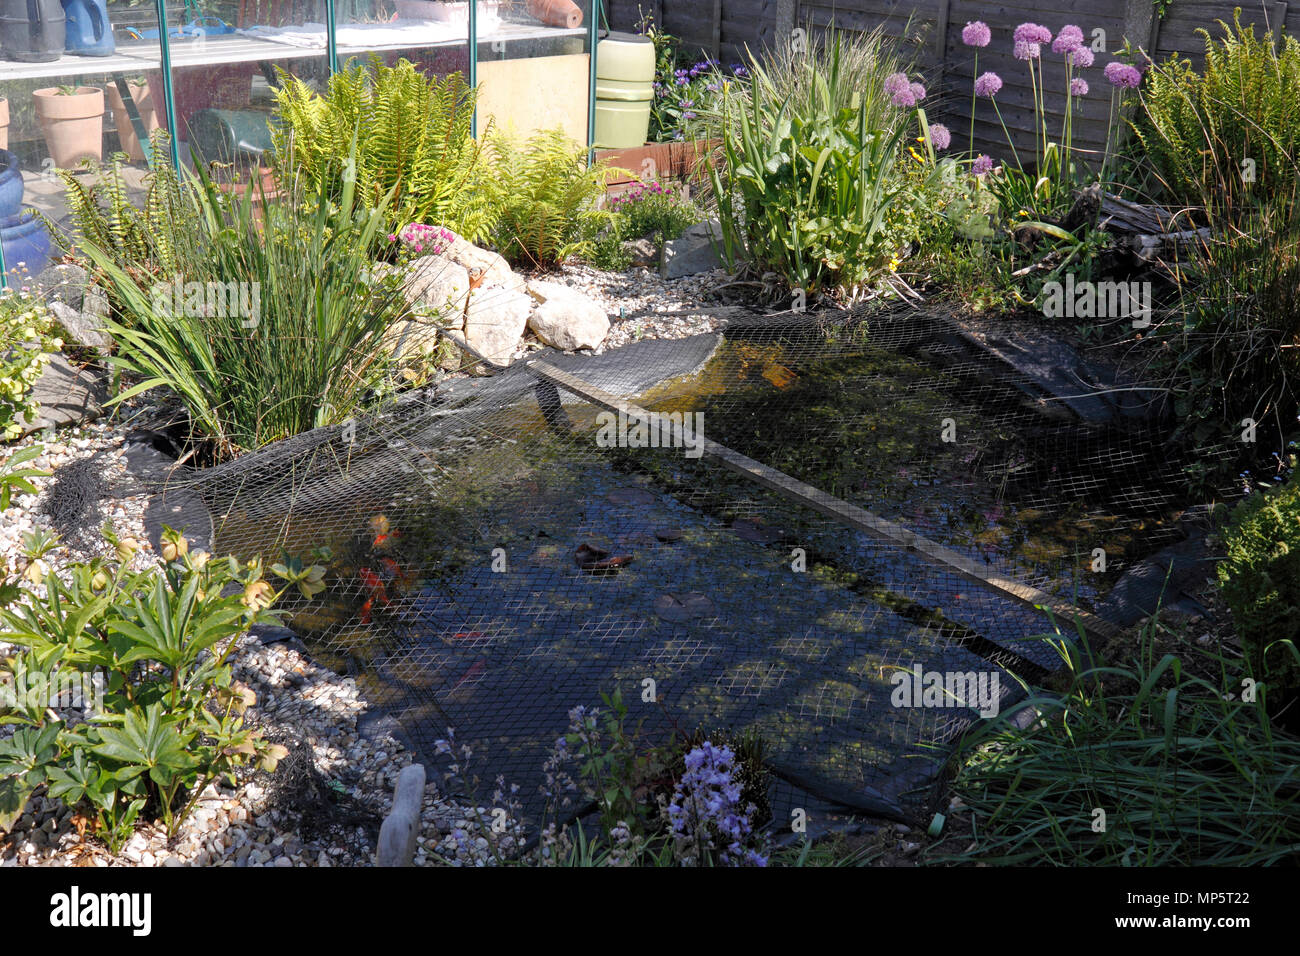 SMALL WILDLIFE GARDEN POND PROTECTED WITH A HERON NET. Stock Photo